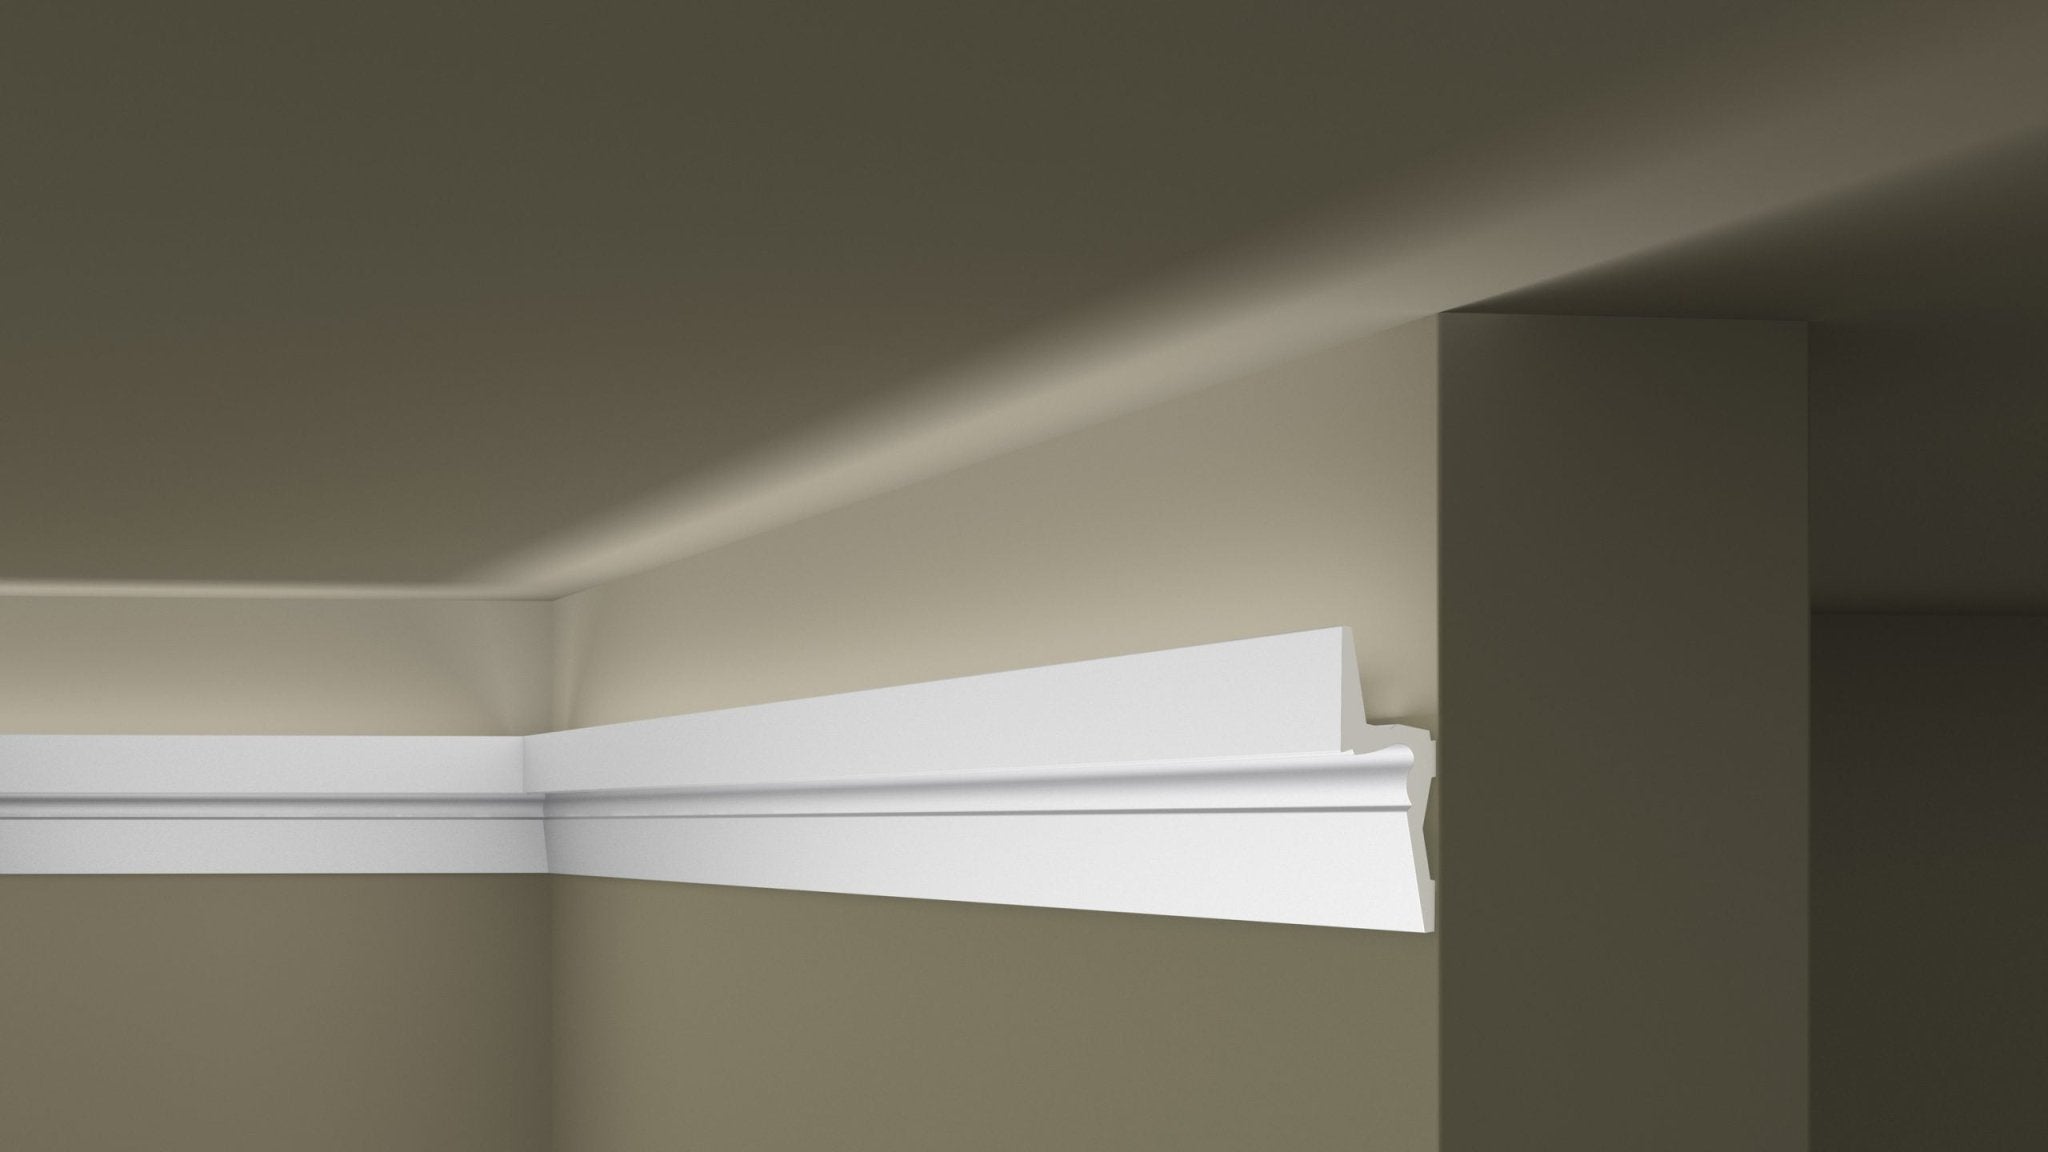 IL9 MEMORY ARSTYL 2M COVING LIGHTING SOLUTION - Covings | DecorMania